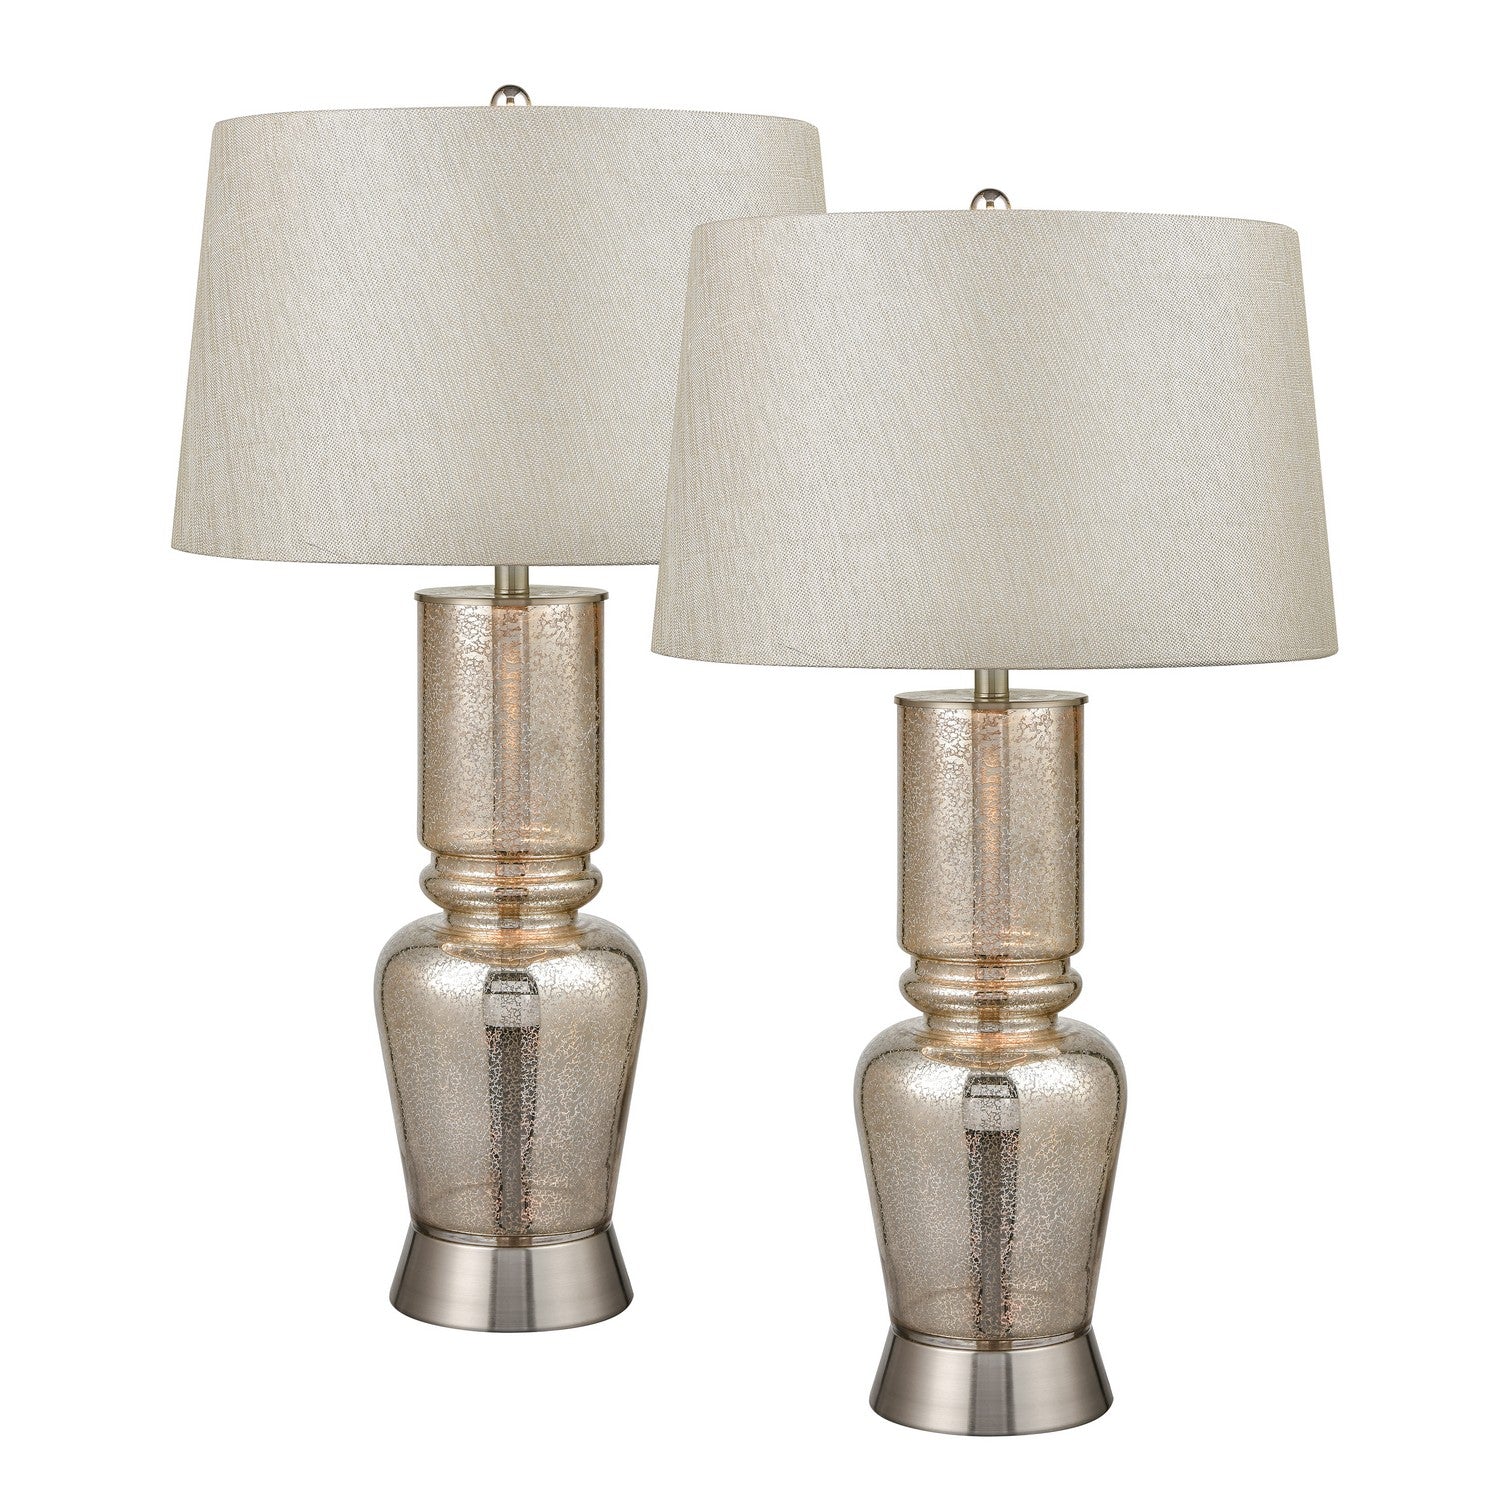 ELK Home - S0019-9478/S2 - One Light Table Lamp - Set of 2 - Sisely - Silver Mercury